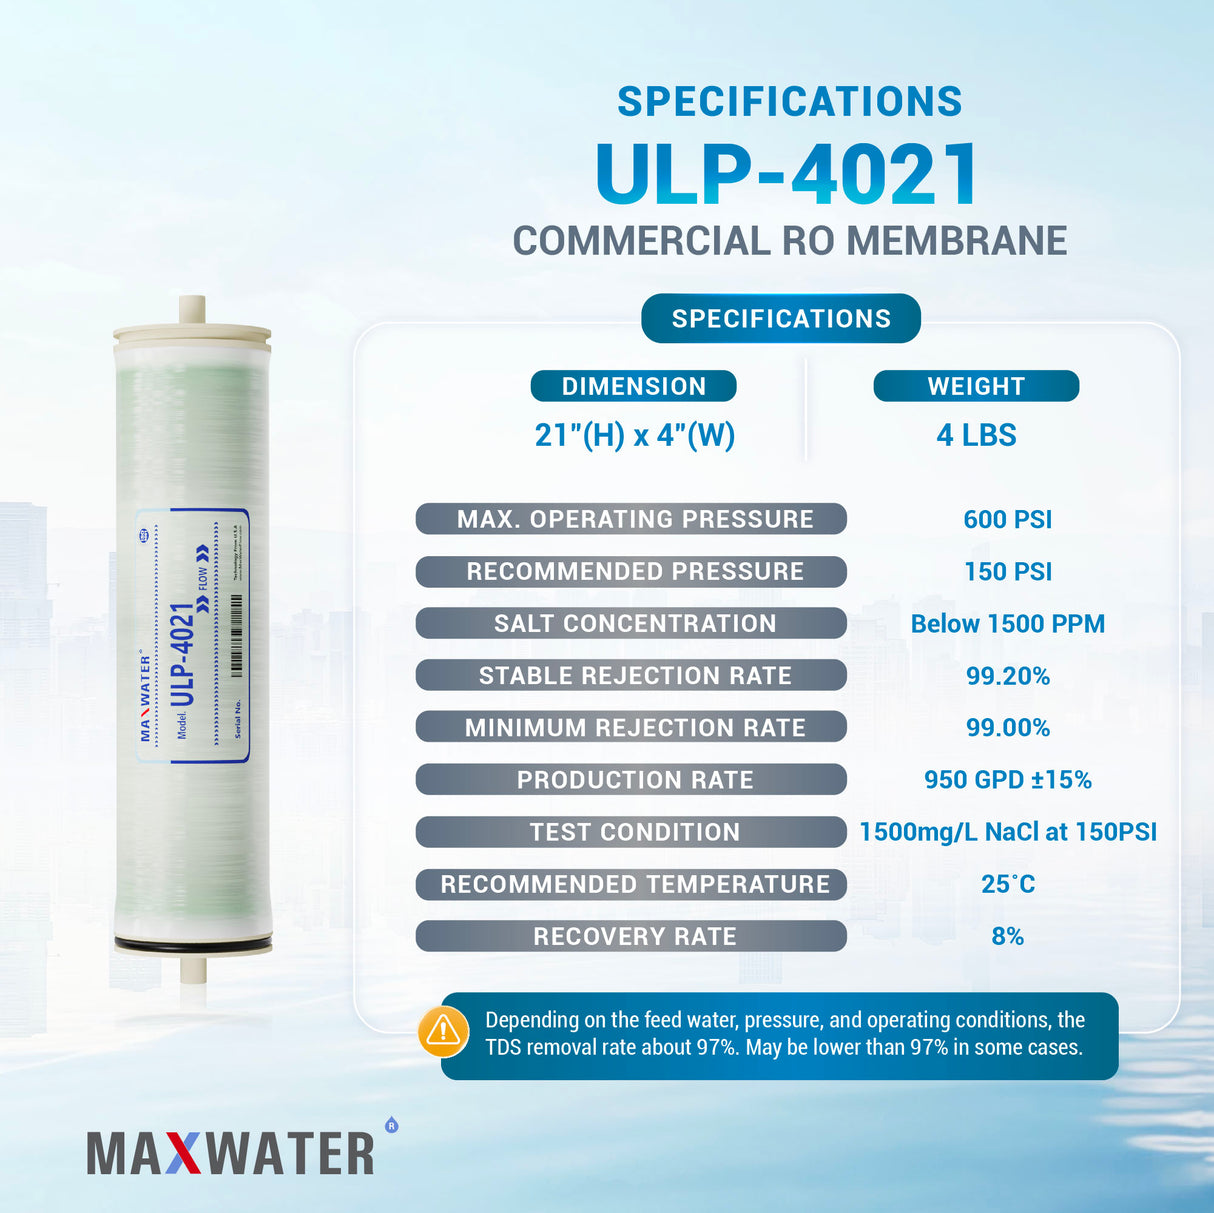 RO membrane for commercial use specifications